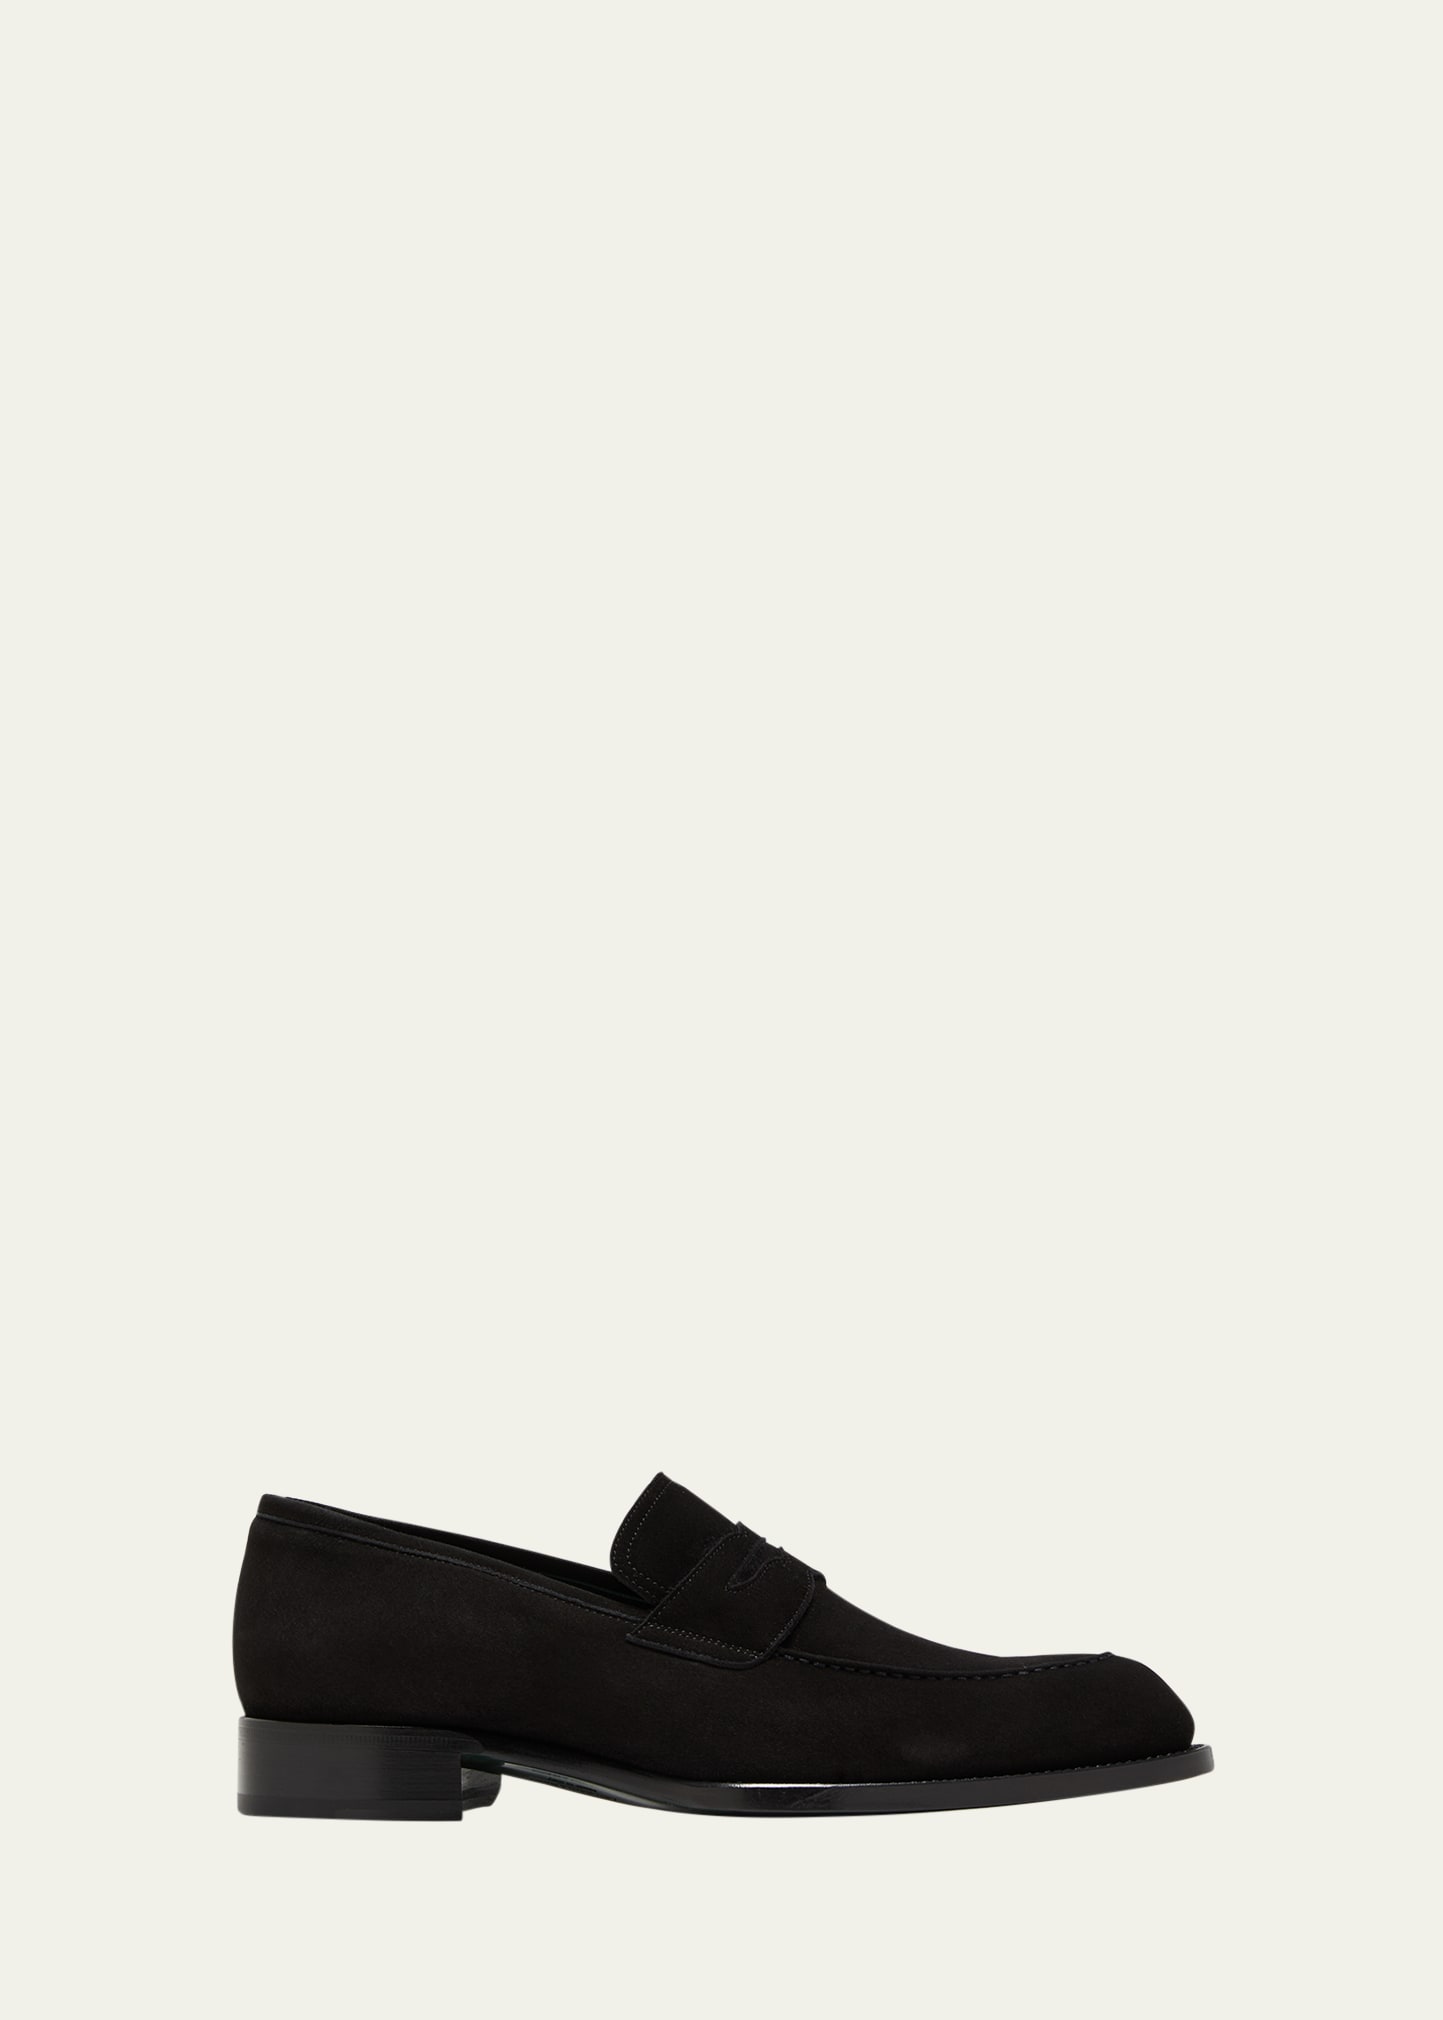 Brioni Men's Suede Penny Loafers In Black